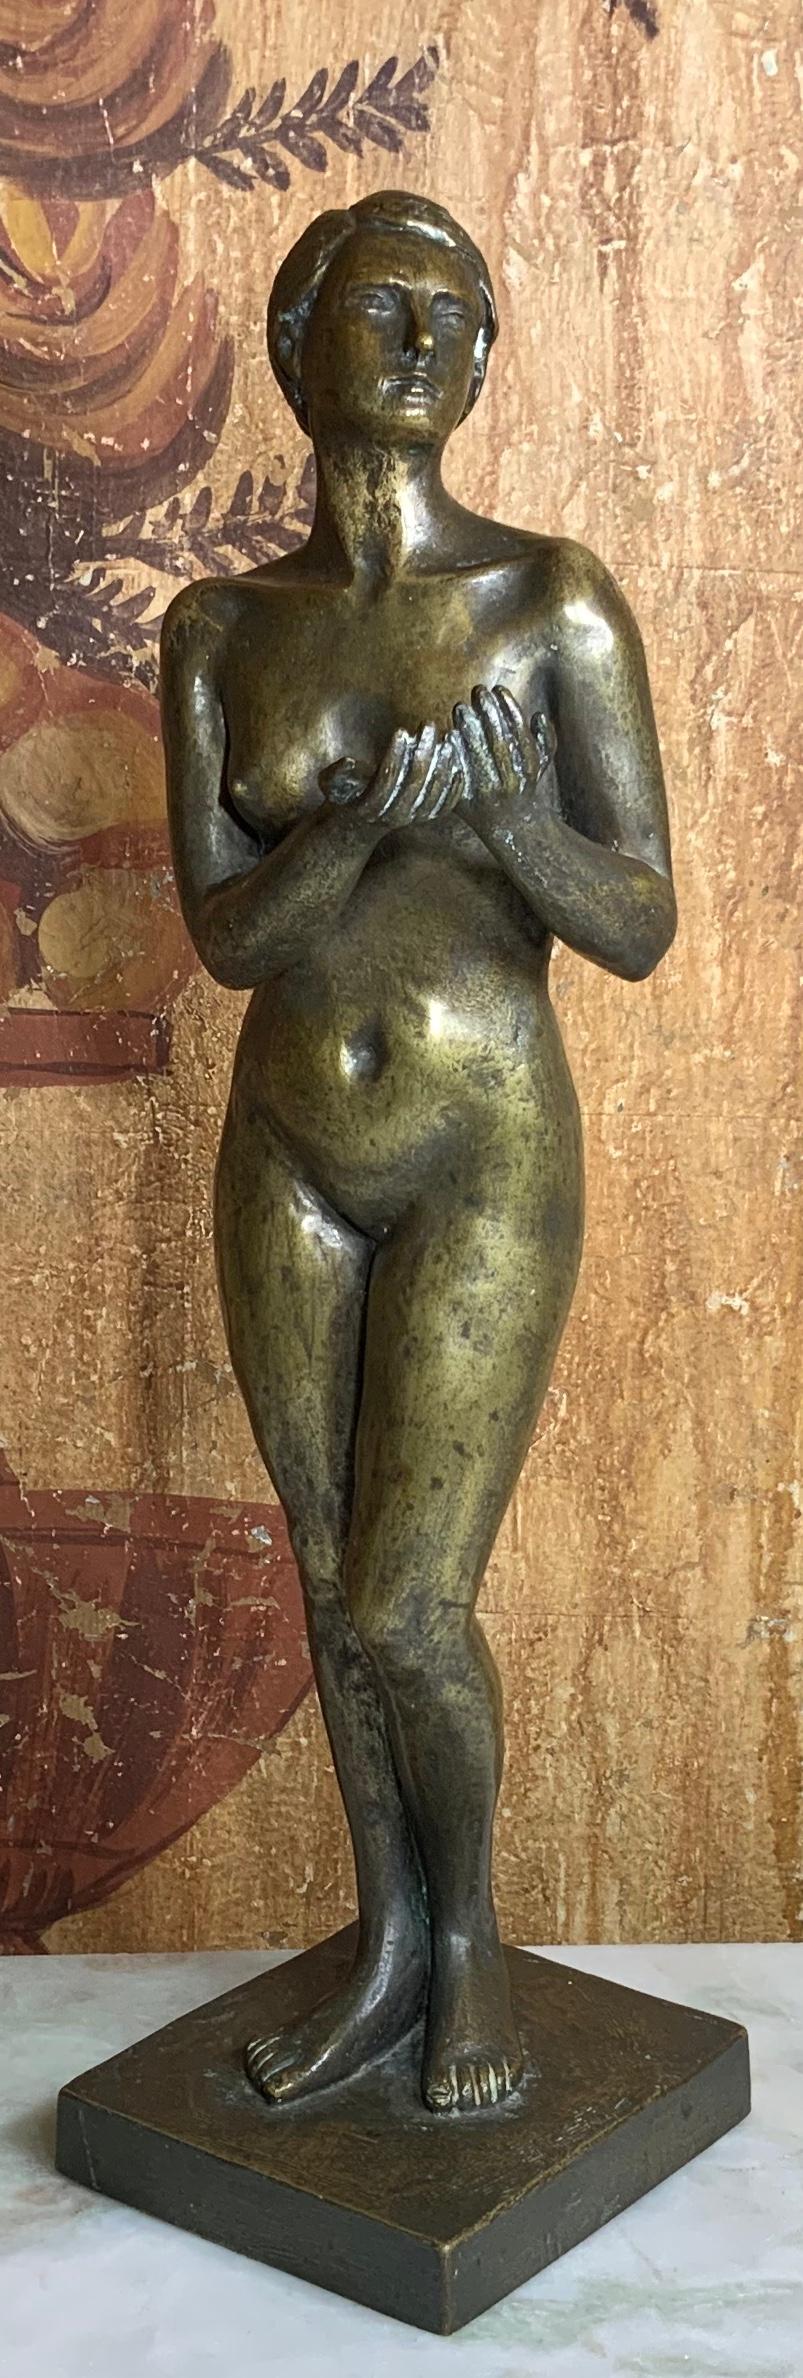 Elegant nude neoclassical bronze sculpture of woman with her hand raised looking forward. Great looking patina, beautiful object of art for display.
Marked in the back bottom.